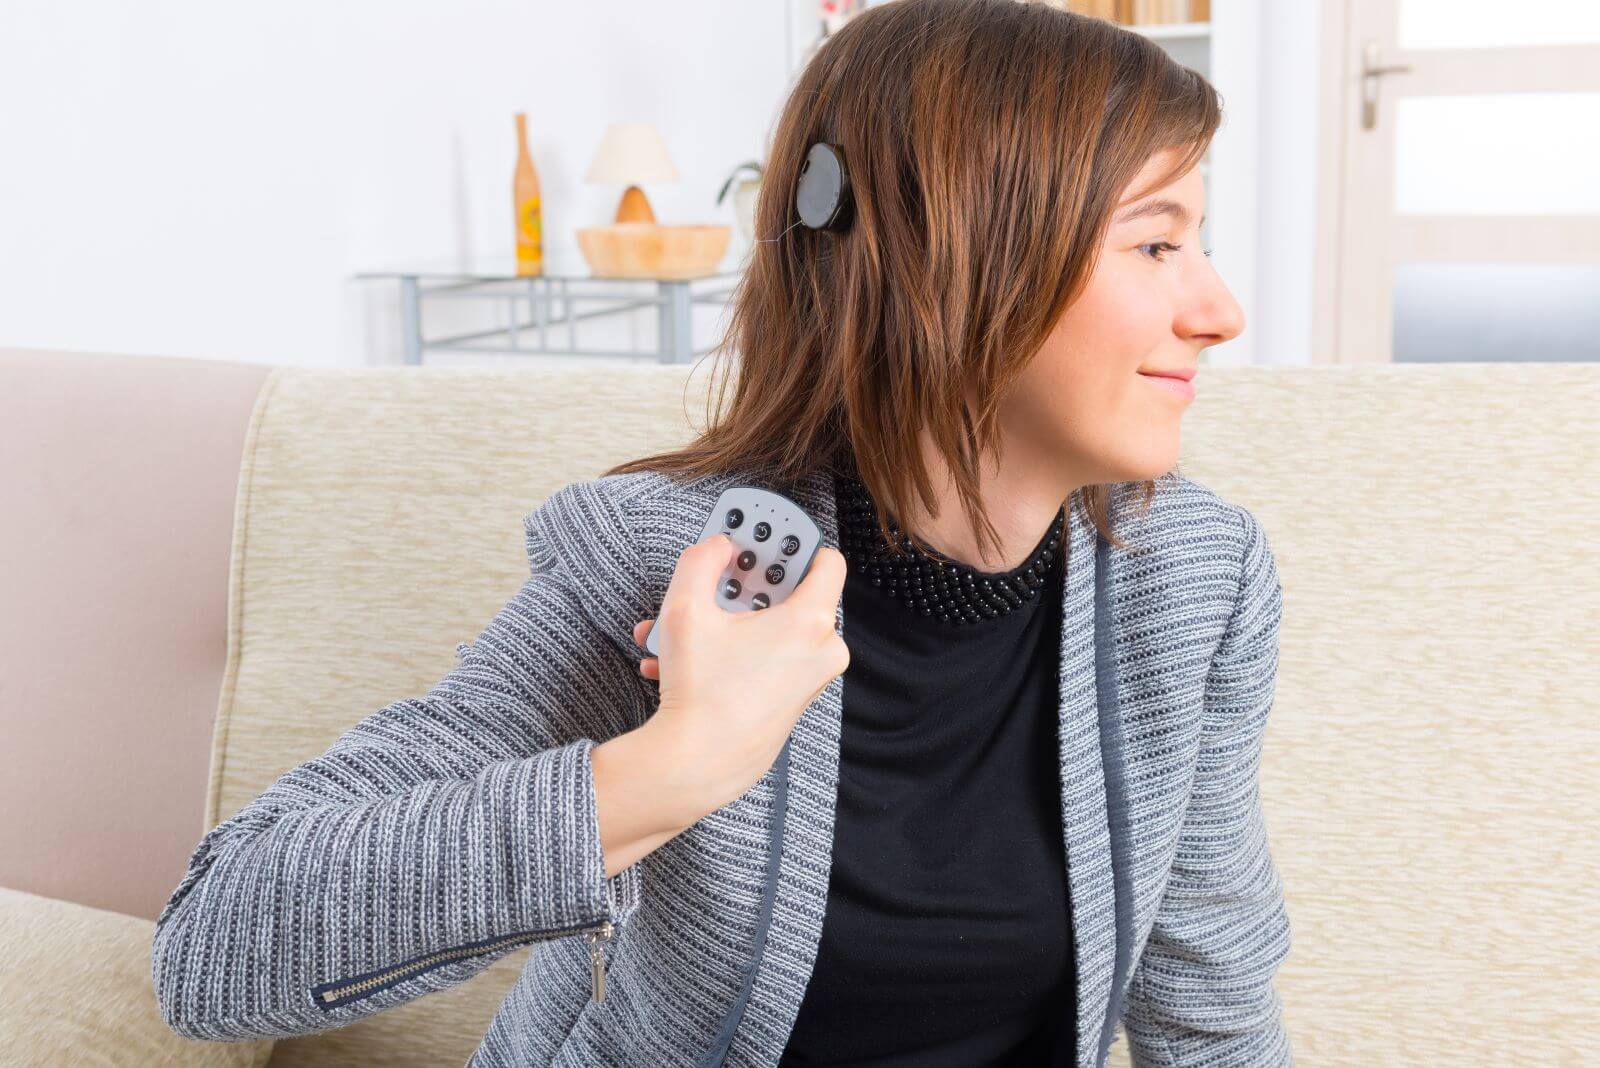 Woman with cochlear implant holding remote control